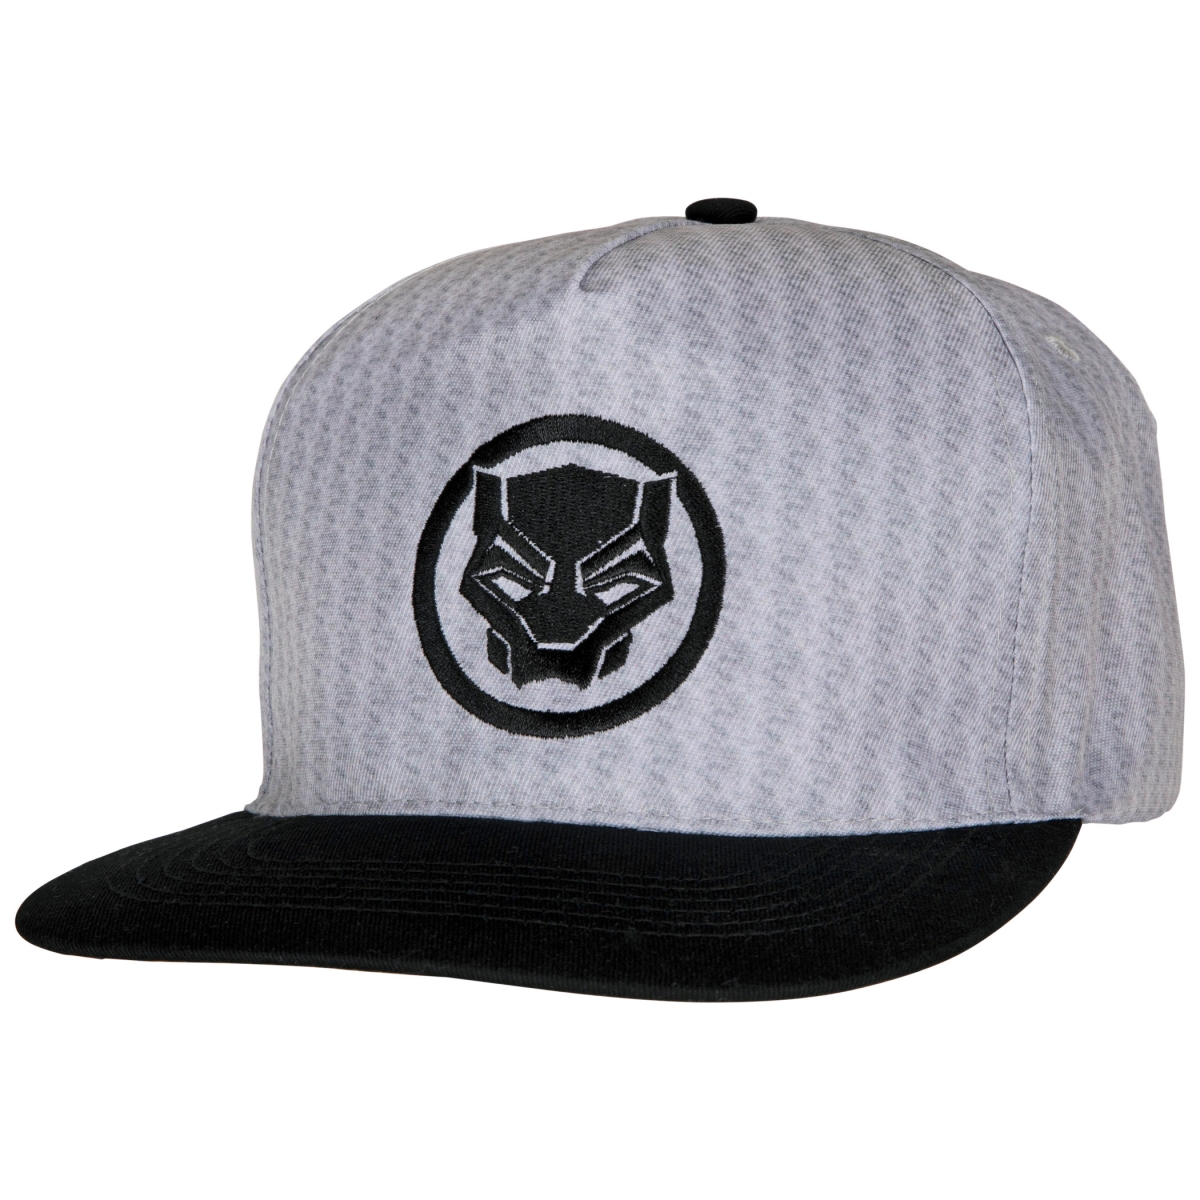 Picture of Black Panther 837956 Marvel Comics Black Panther Embroidery Symbol Reflective Flat Bill Hat